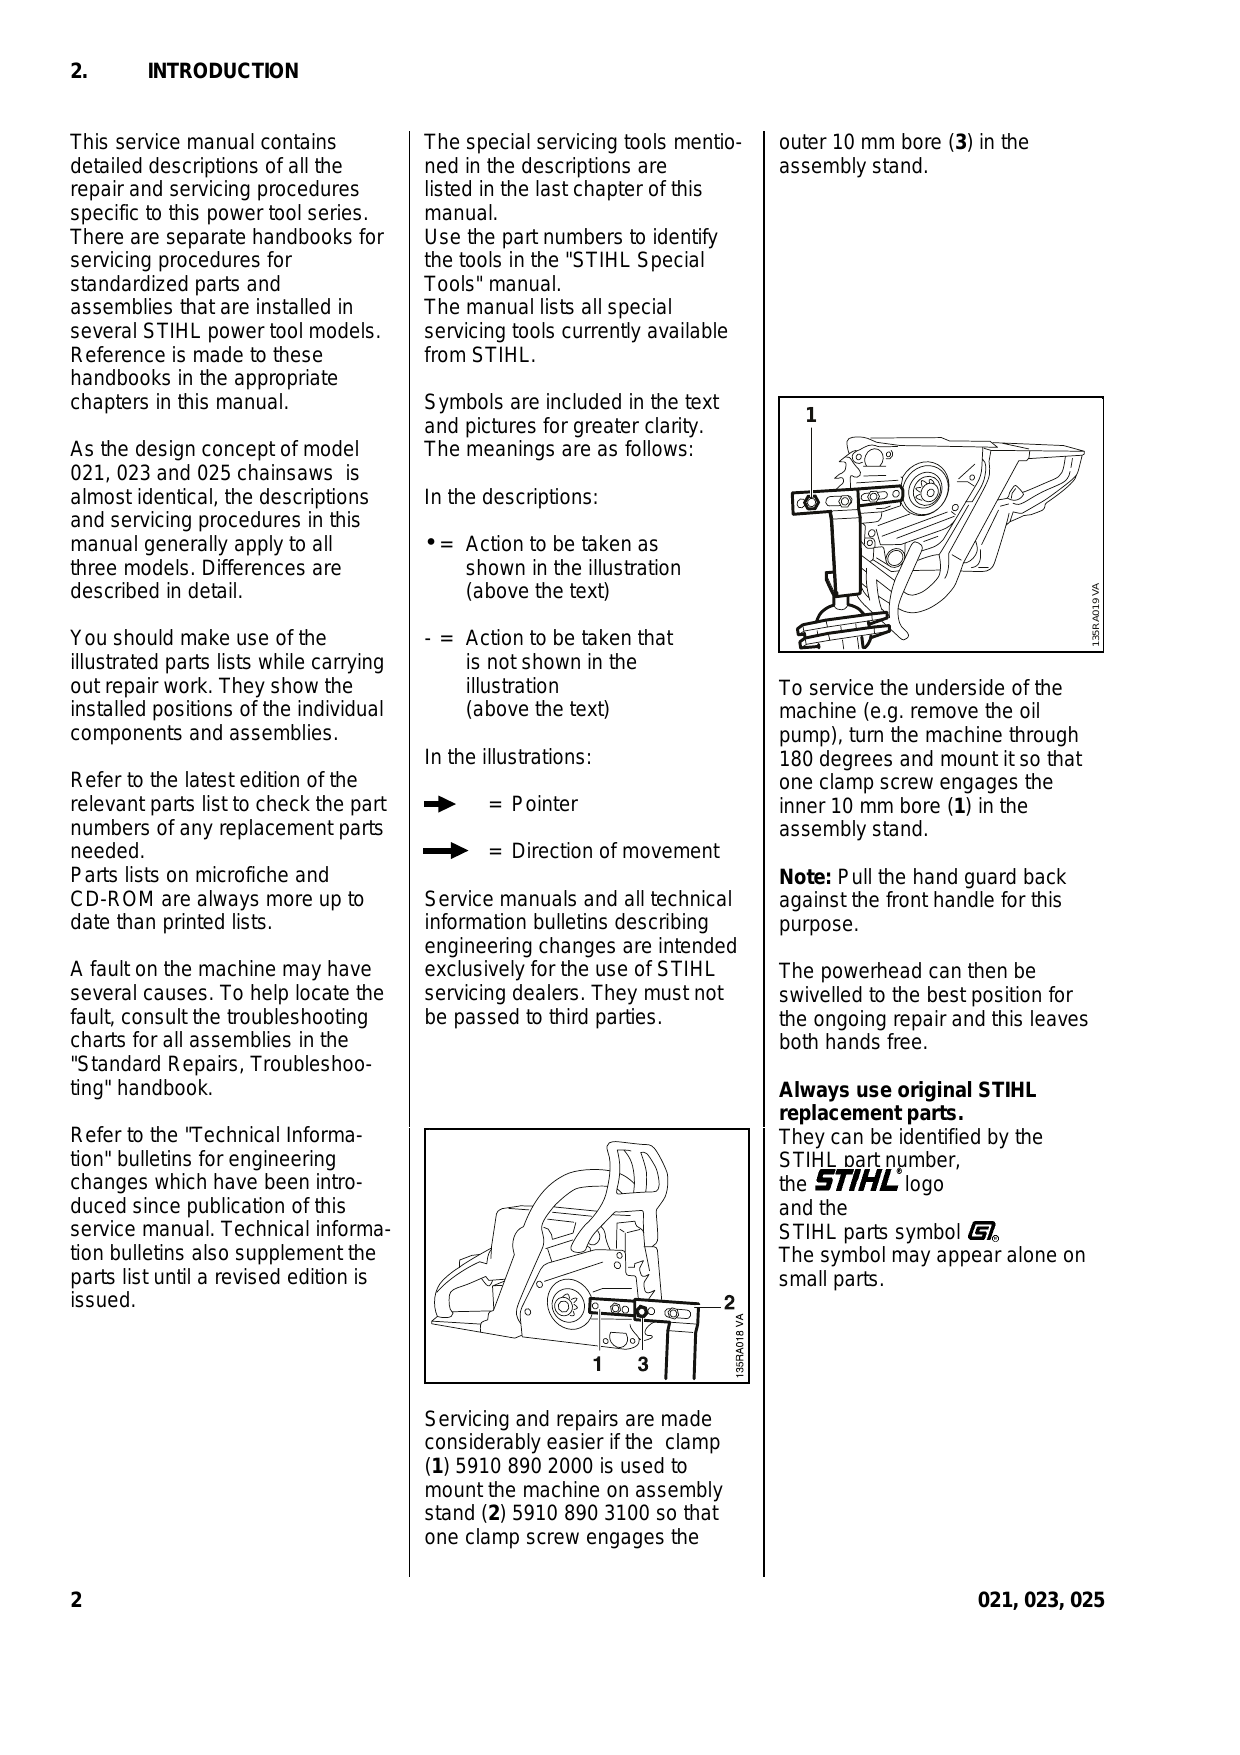 Stihl 021, 023, 025 chainsaw service manual Preview image 2